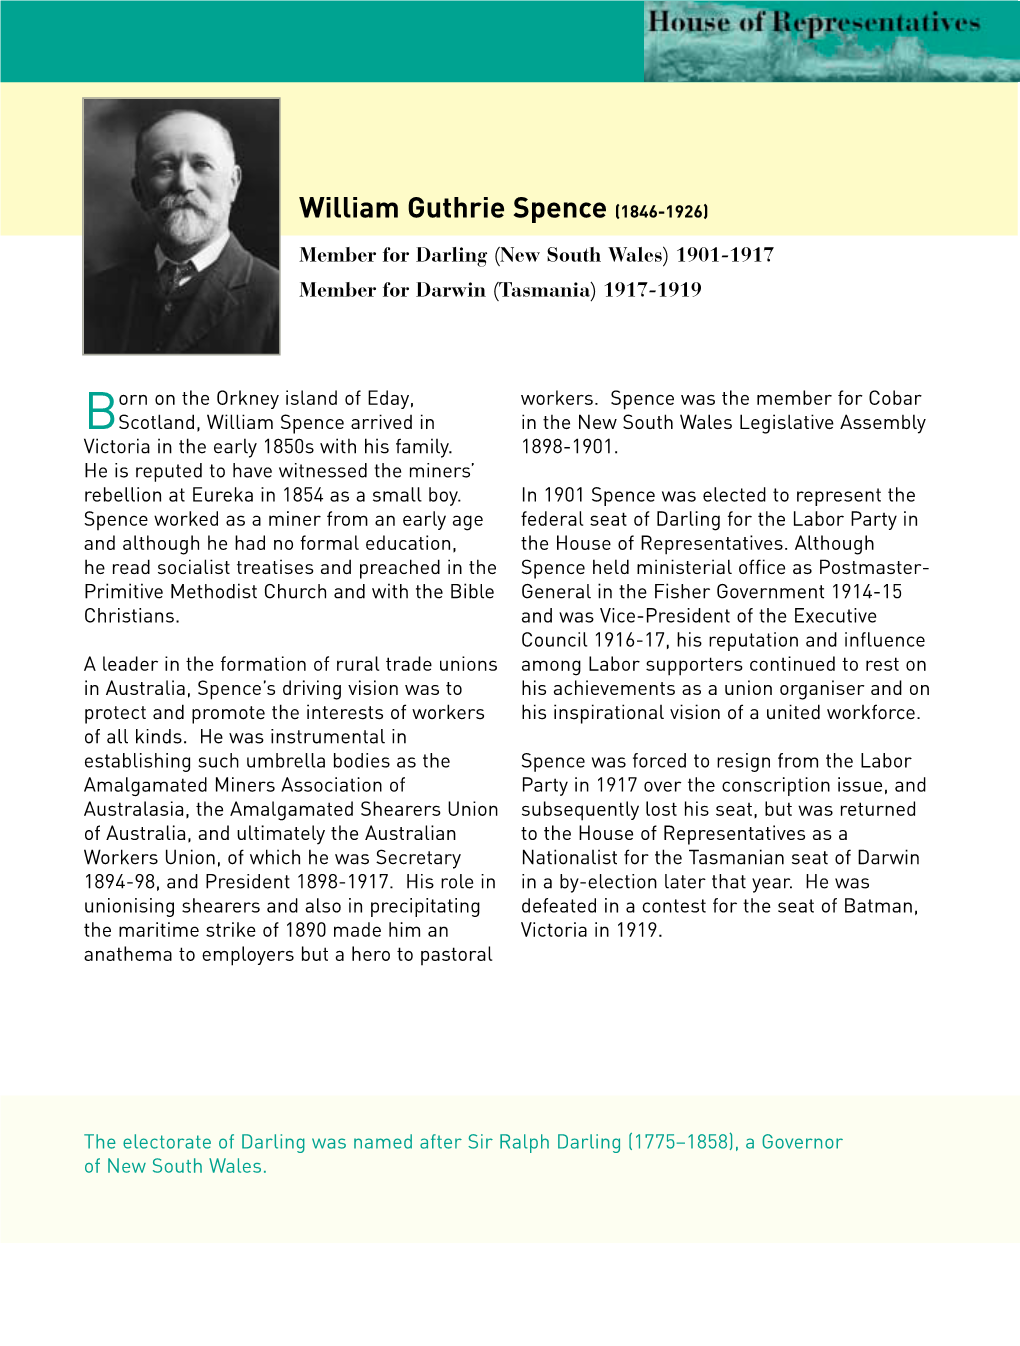 Biography William Guthrie Spence